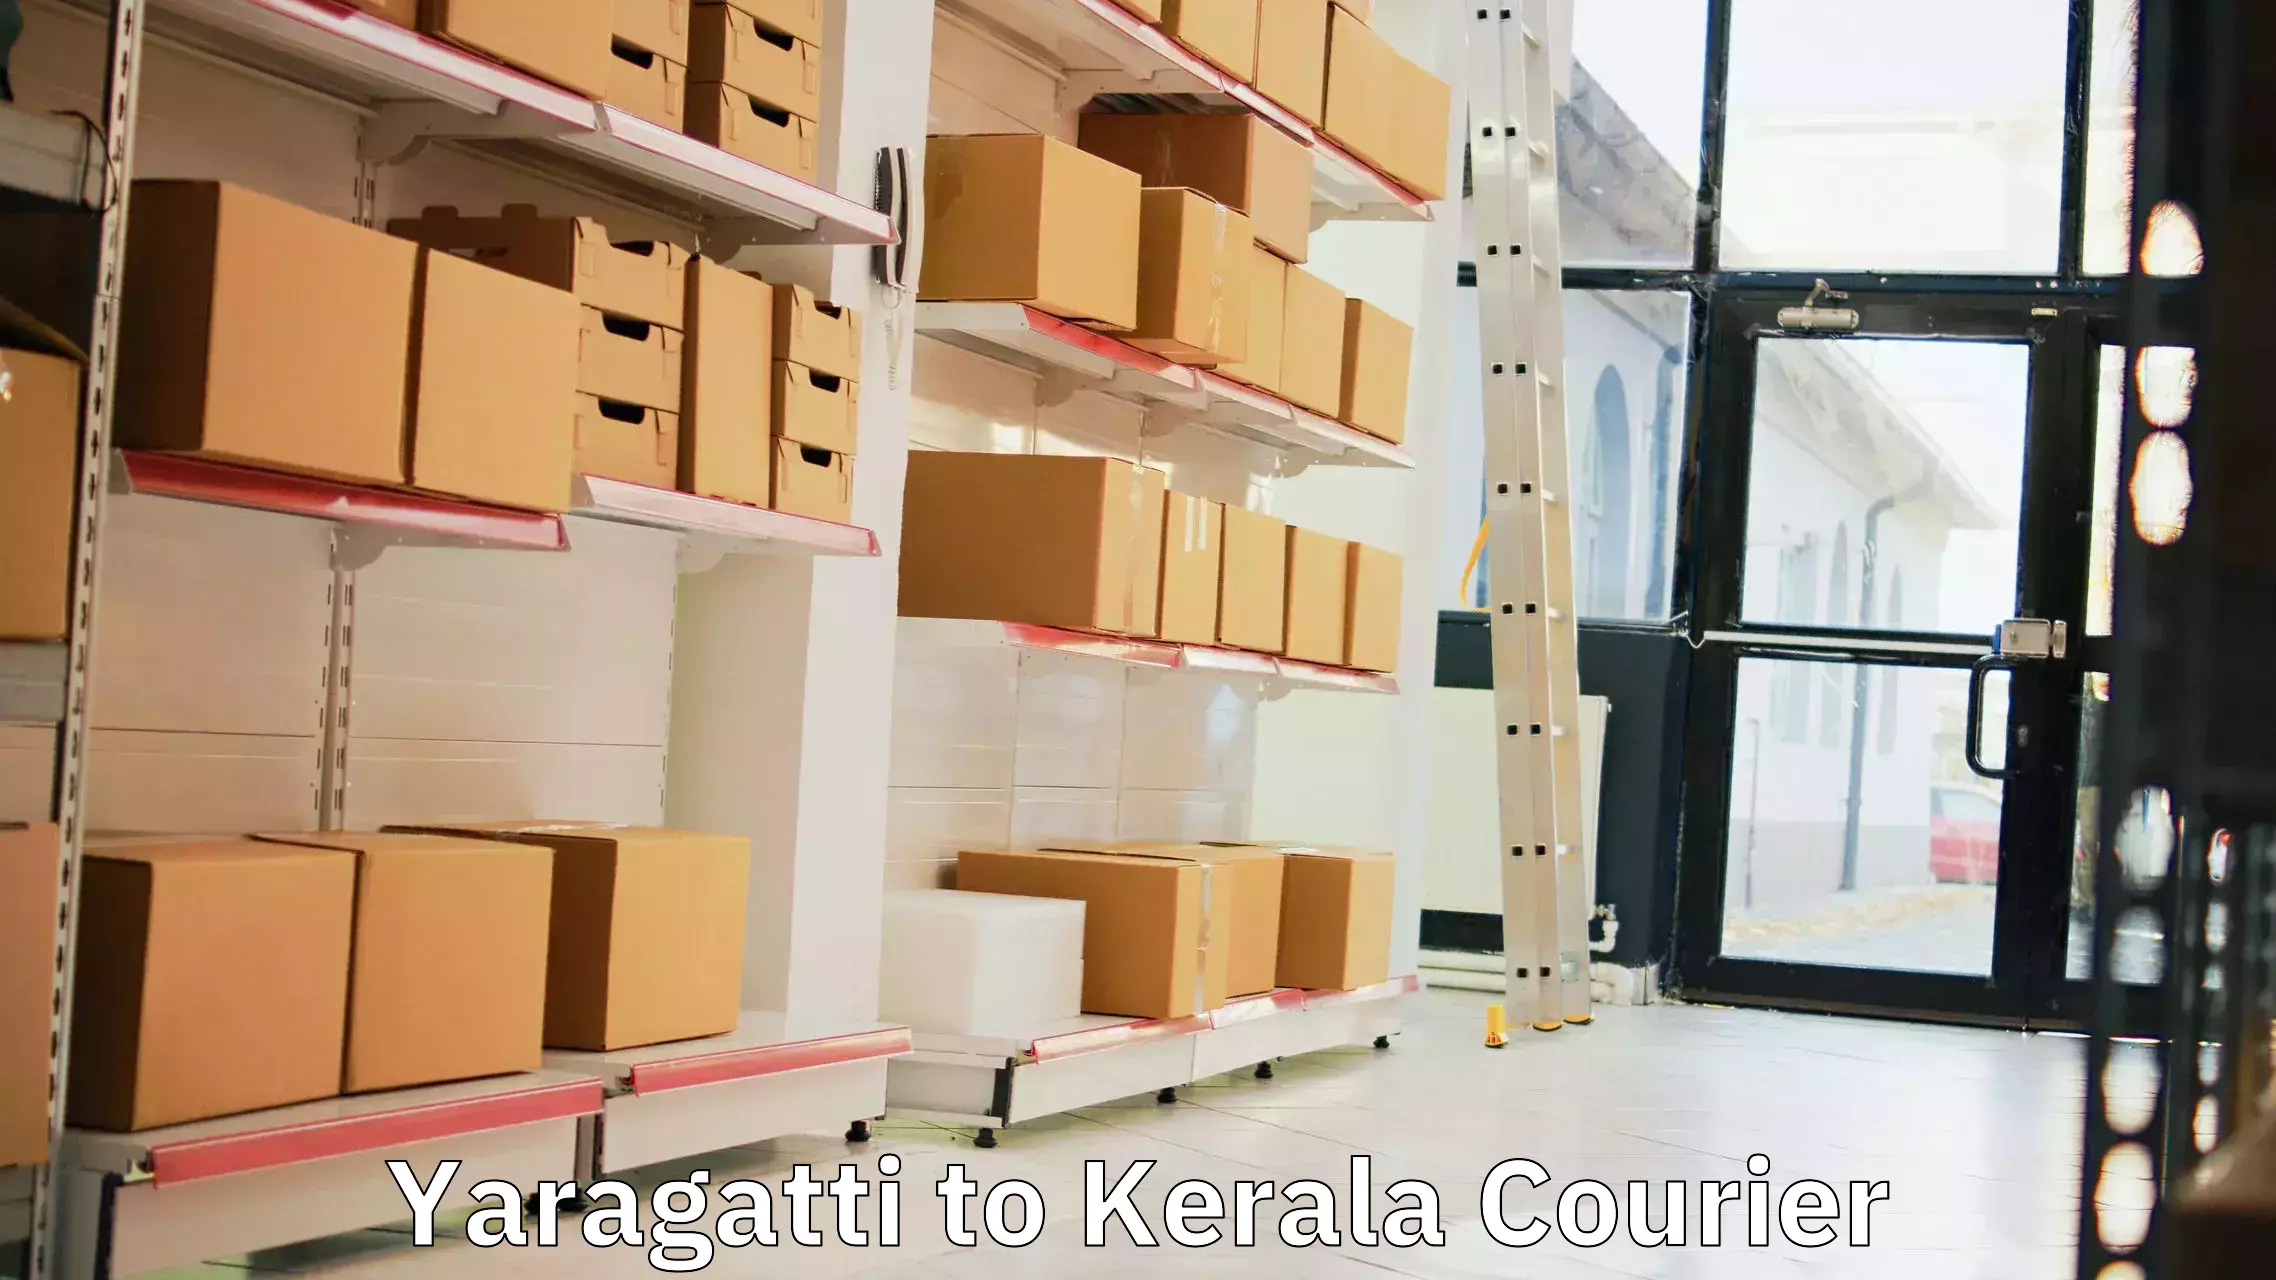 Sustainable delivery practices in Yaragatti to Kerala